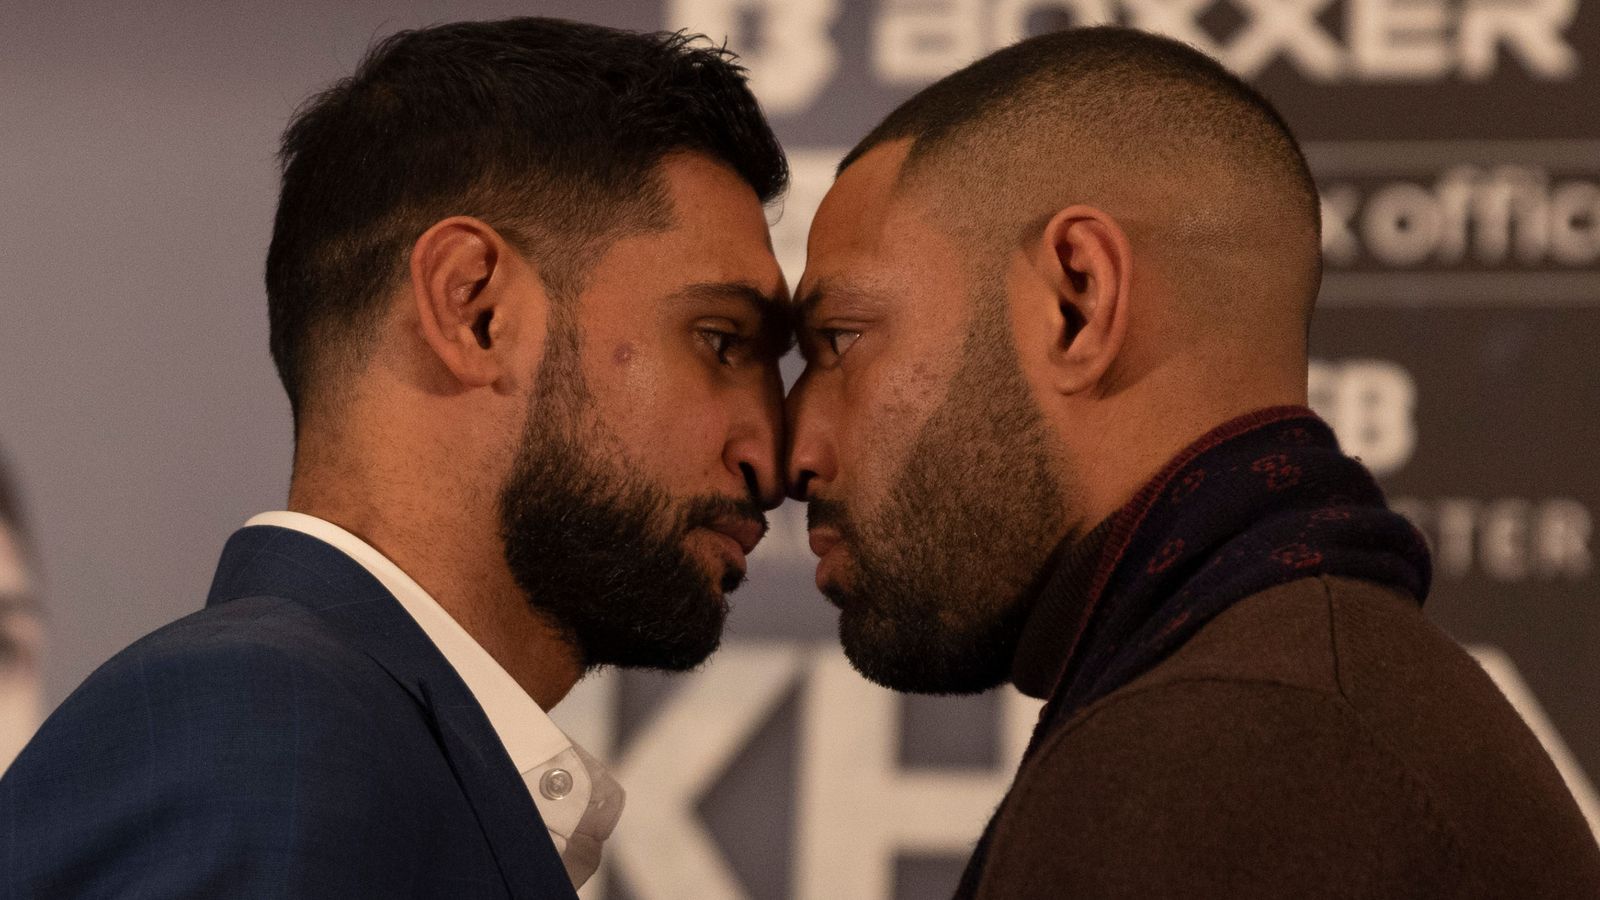 Amir Khan and Kell Brook butt heads and are pulled apart by security as a furious row breaks out at opening press conference